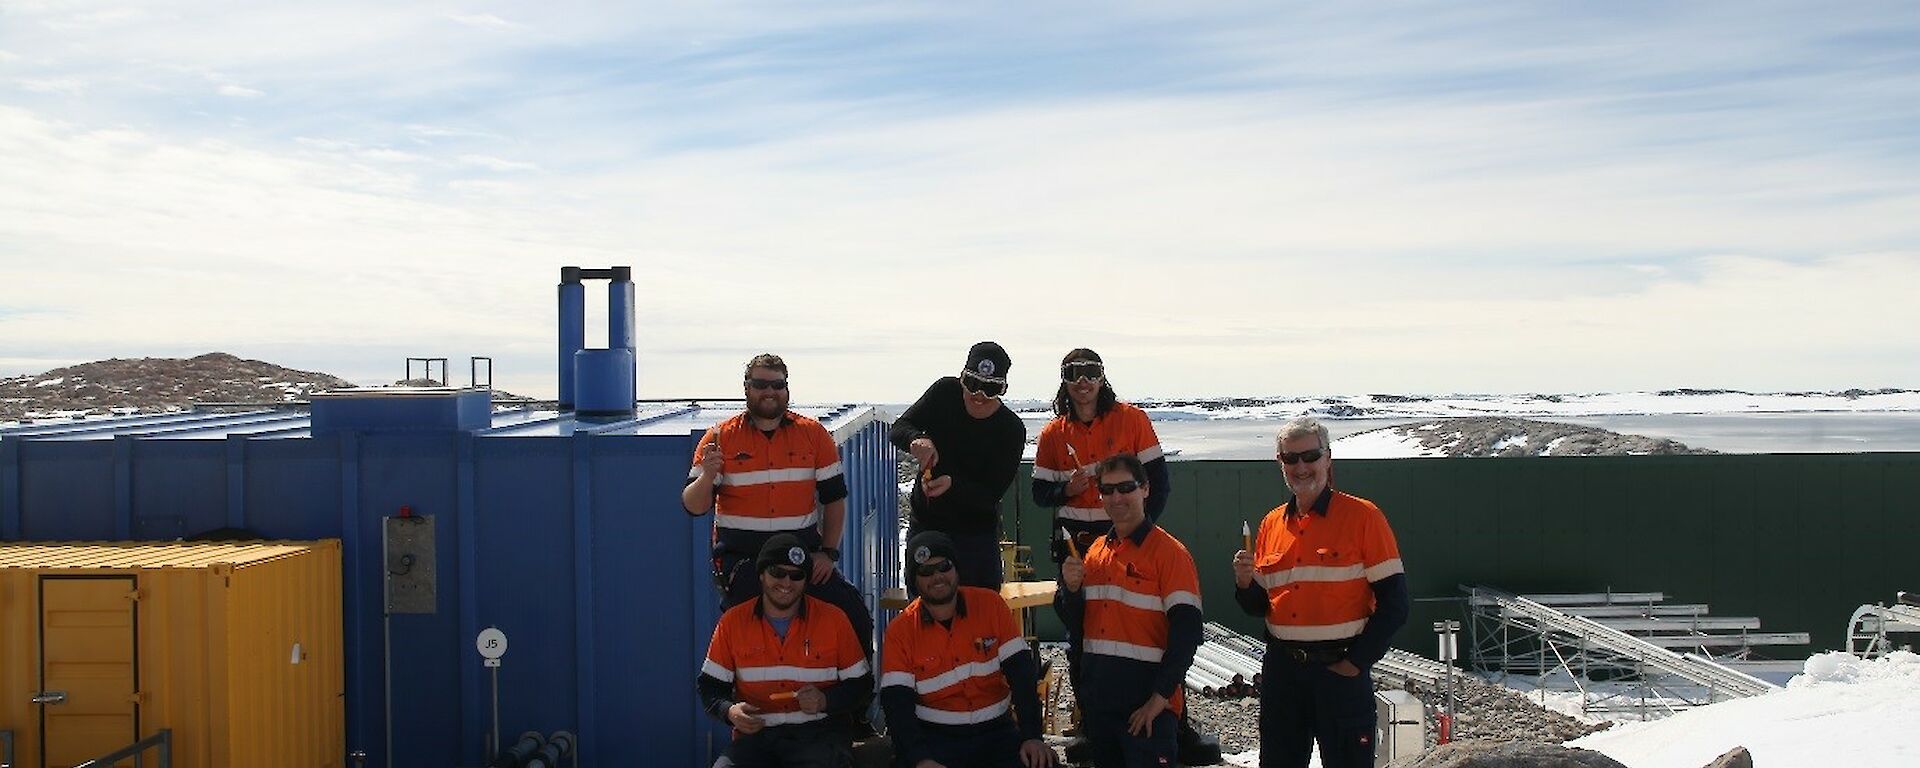 The electrical team standing near the Casey Emergency Power House (EPH, Blue building) with their “magic” test sticks and Newcomb Bay in the background.